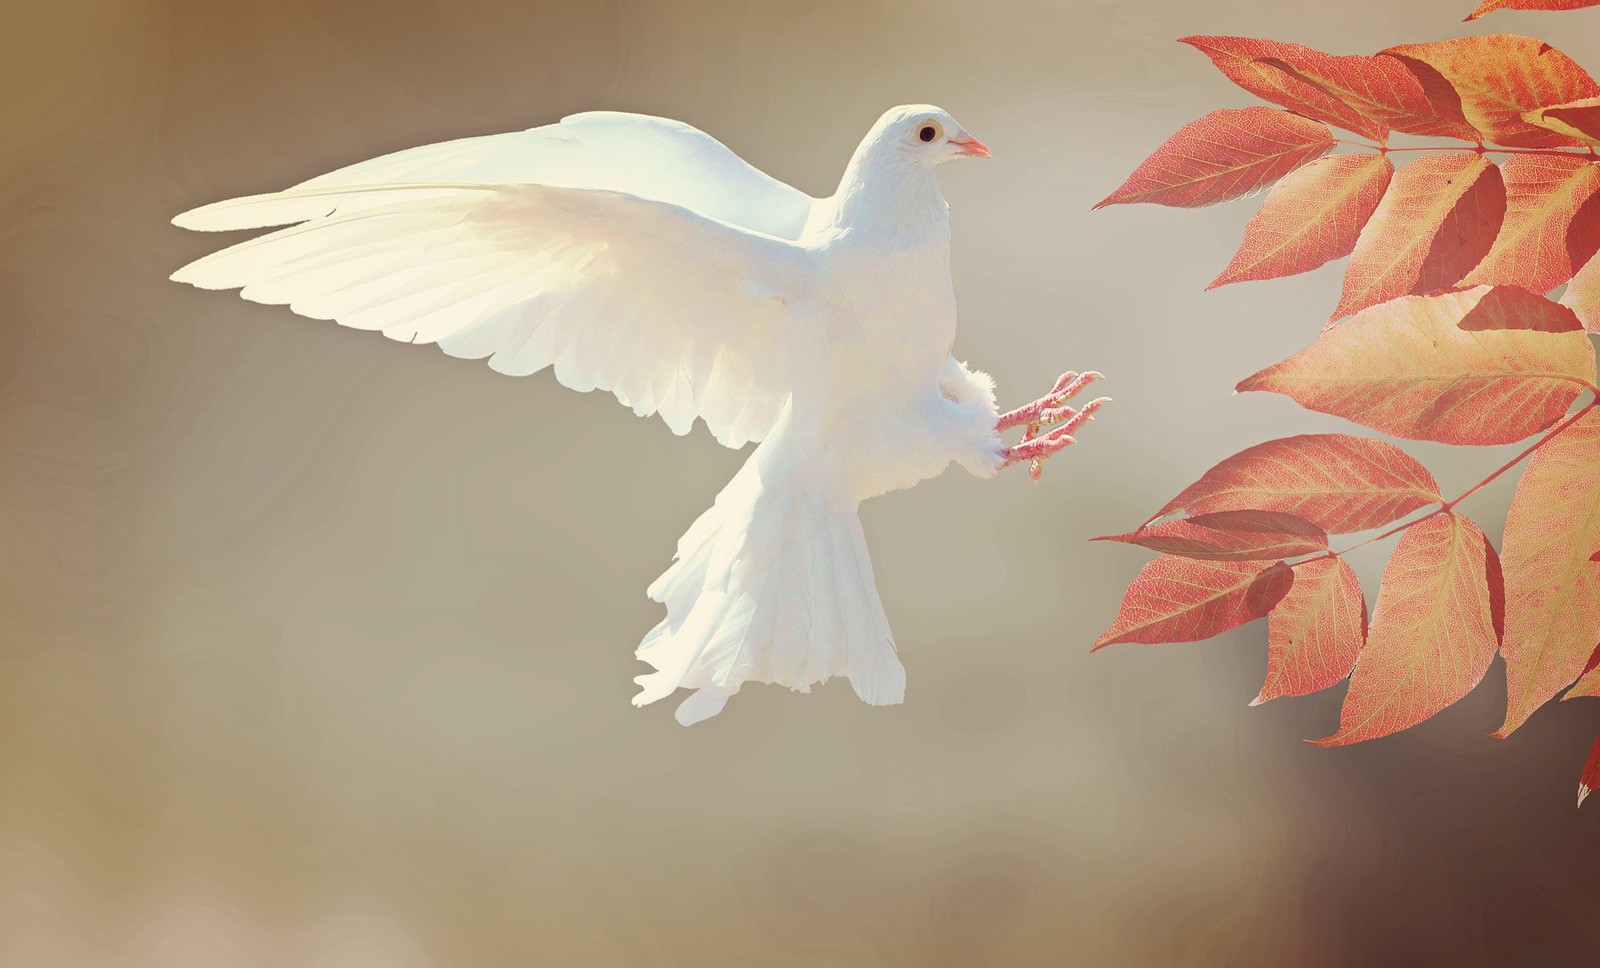 What is the significance of the war-association with dove symbolism?